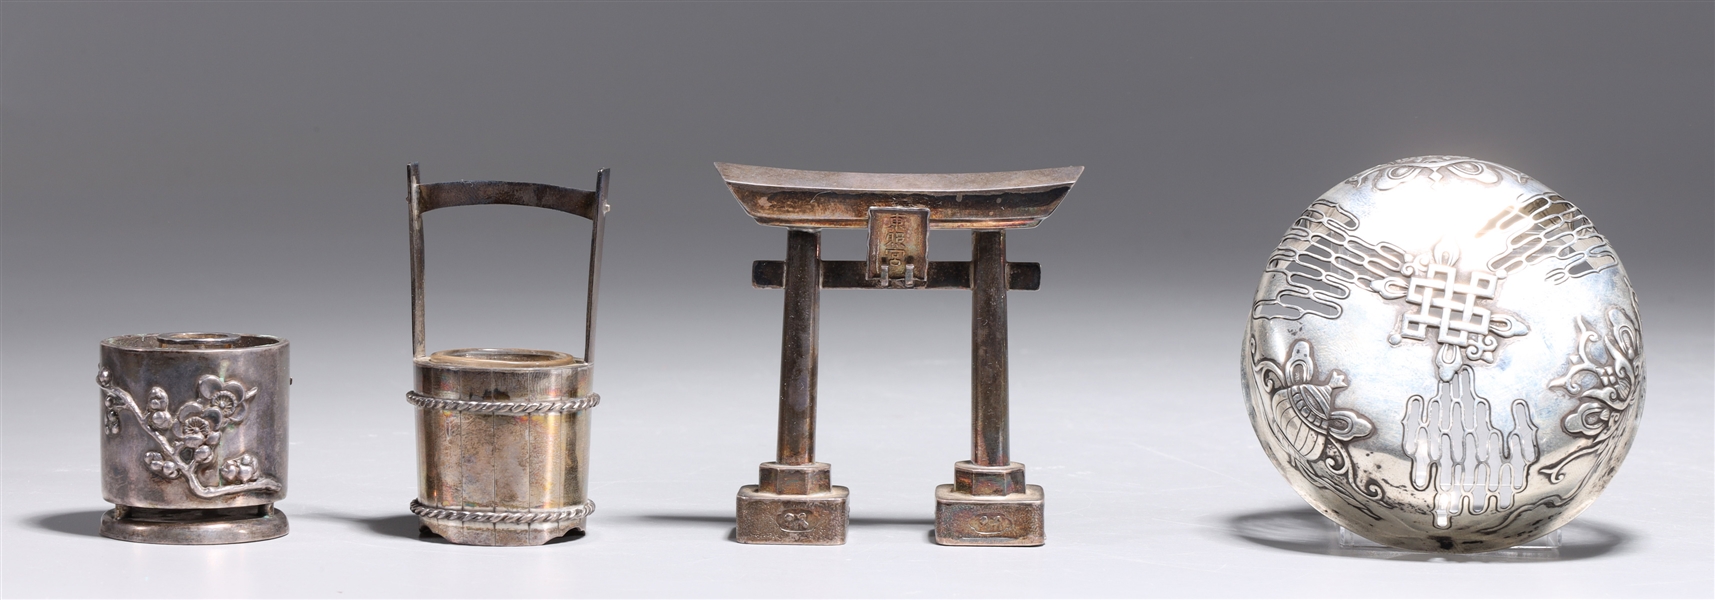 Group of four antique Japanese